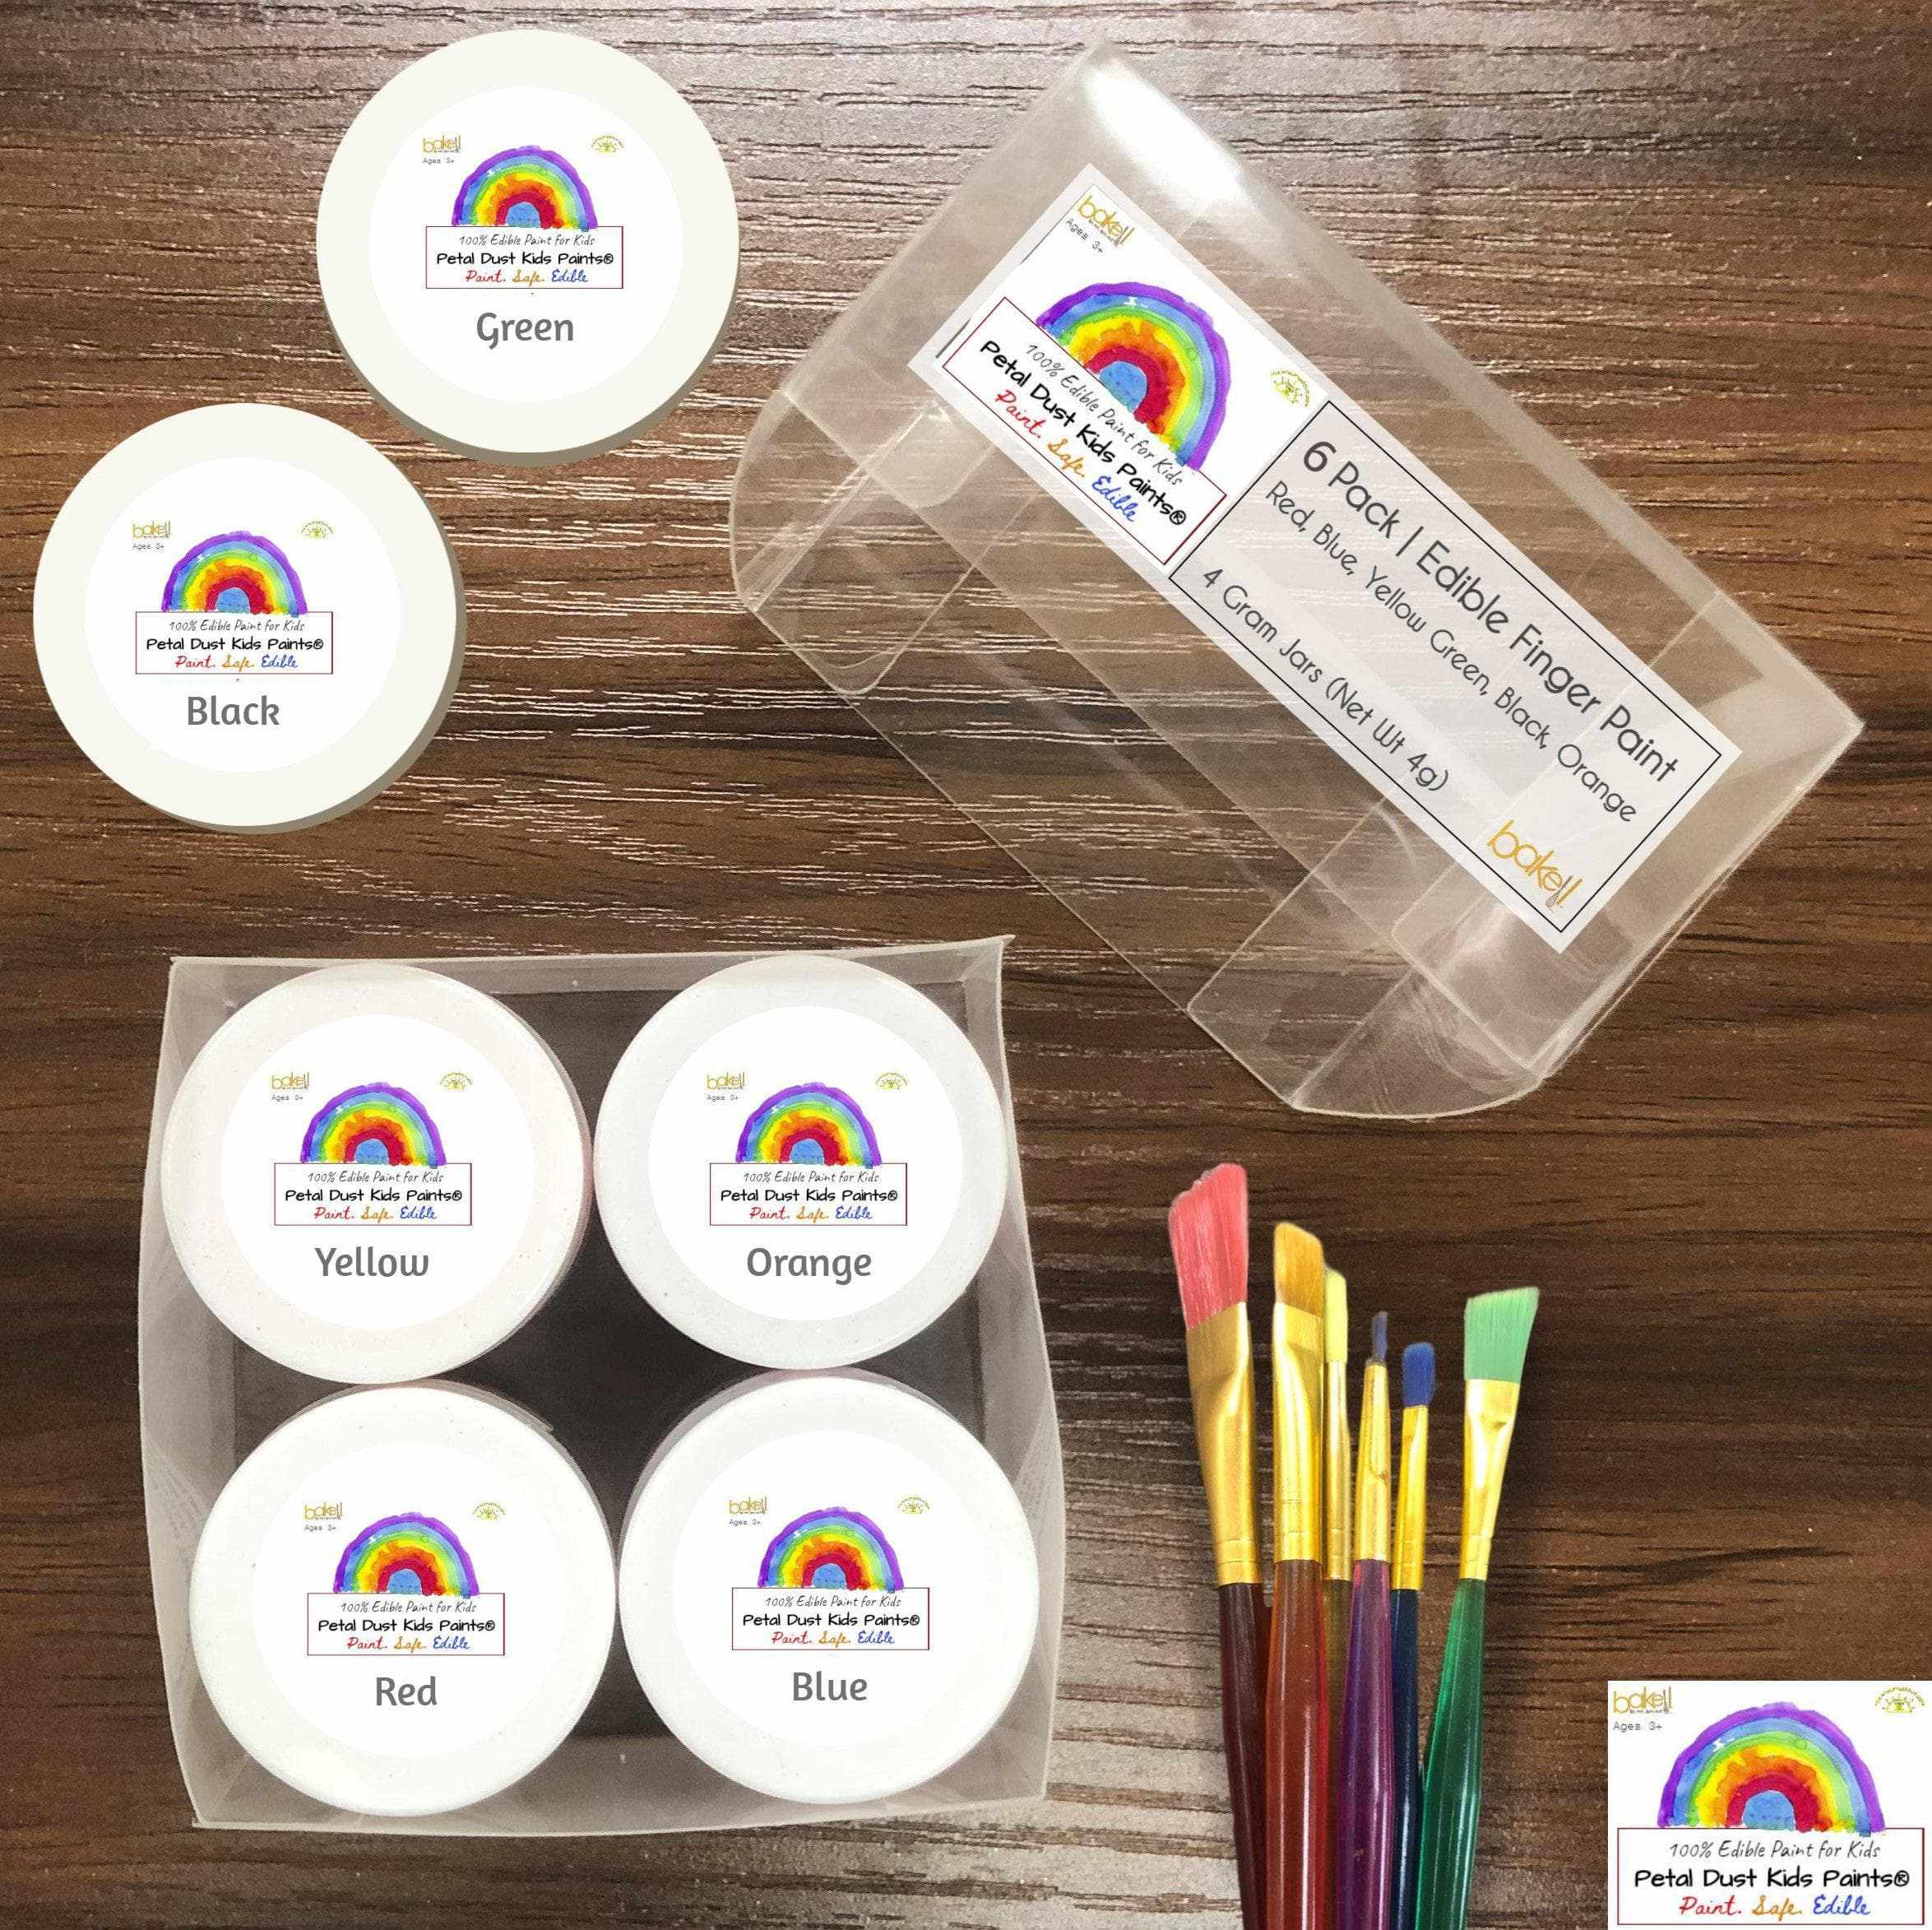 Buy Edible Kids Paint For Toddlers & Kids (12 PC Set) | Bakell